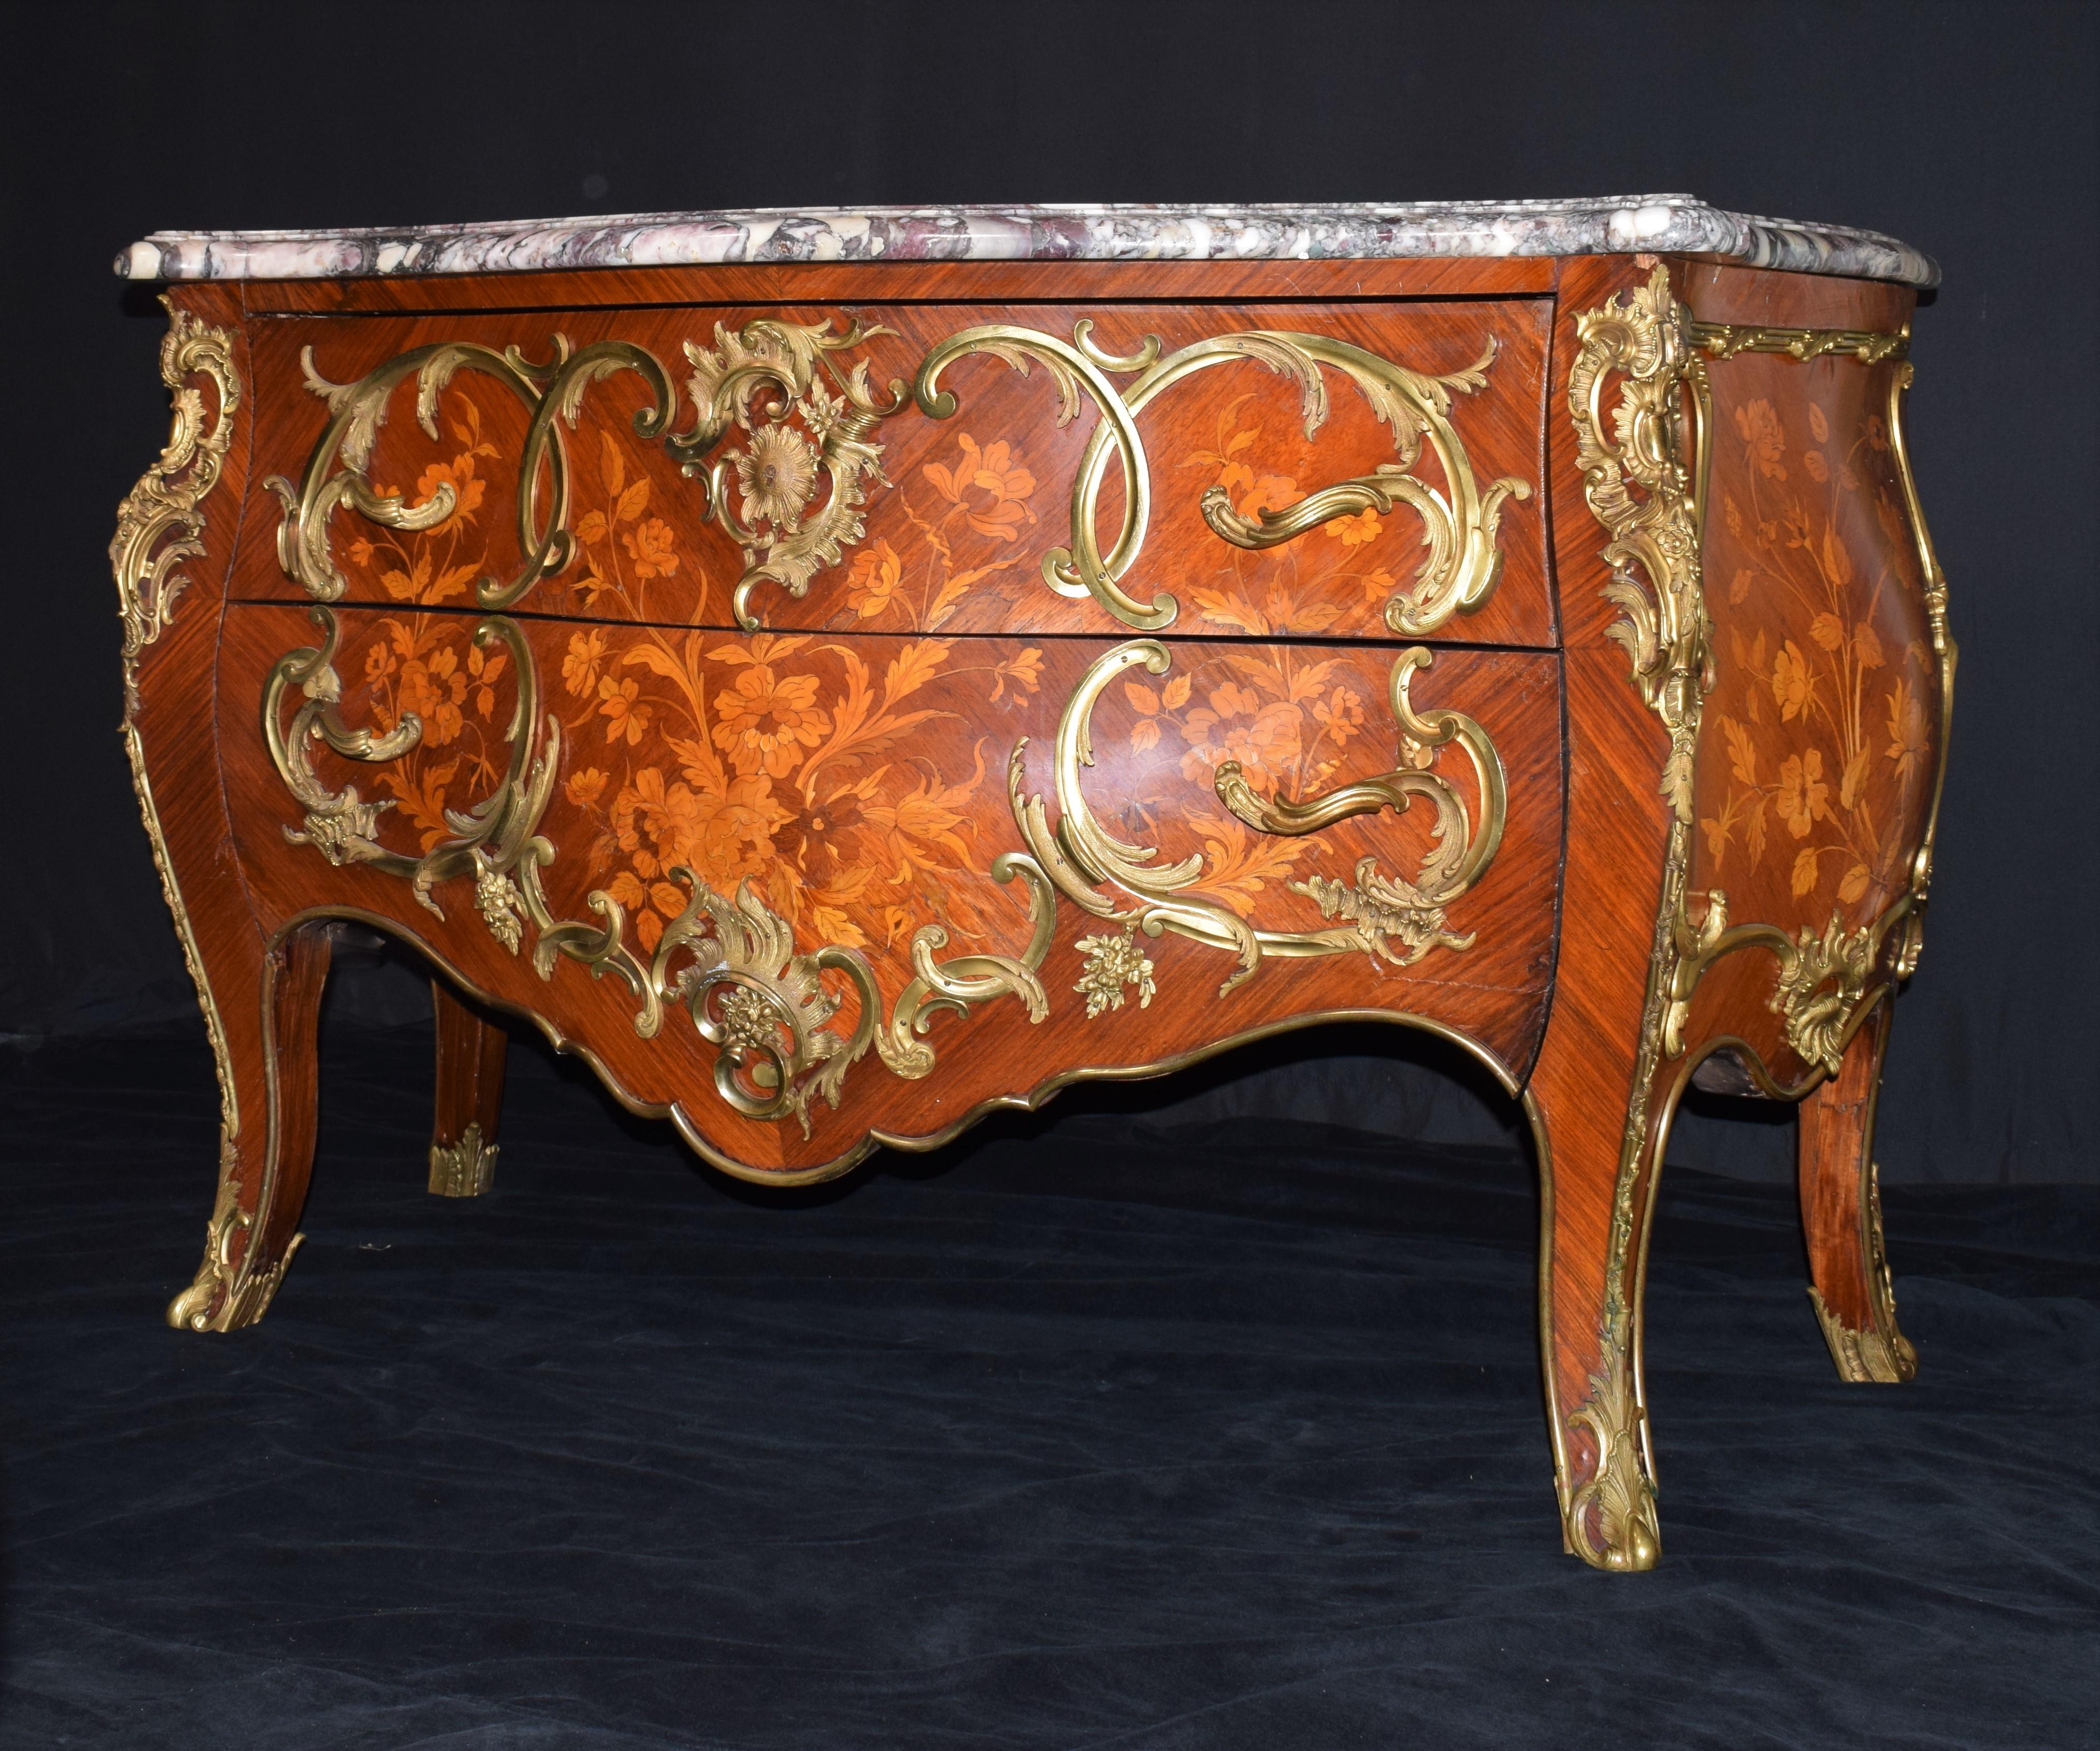 French Louis XV Style Gilt-Bronze-Mounted Marquetry Commode